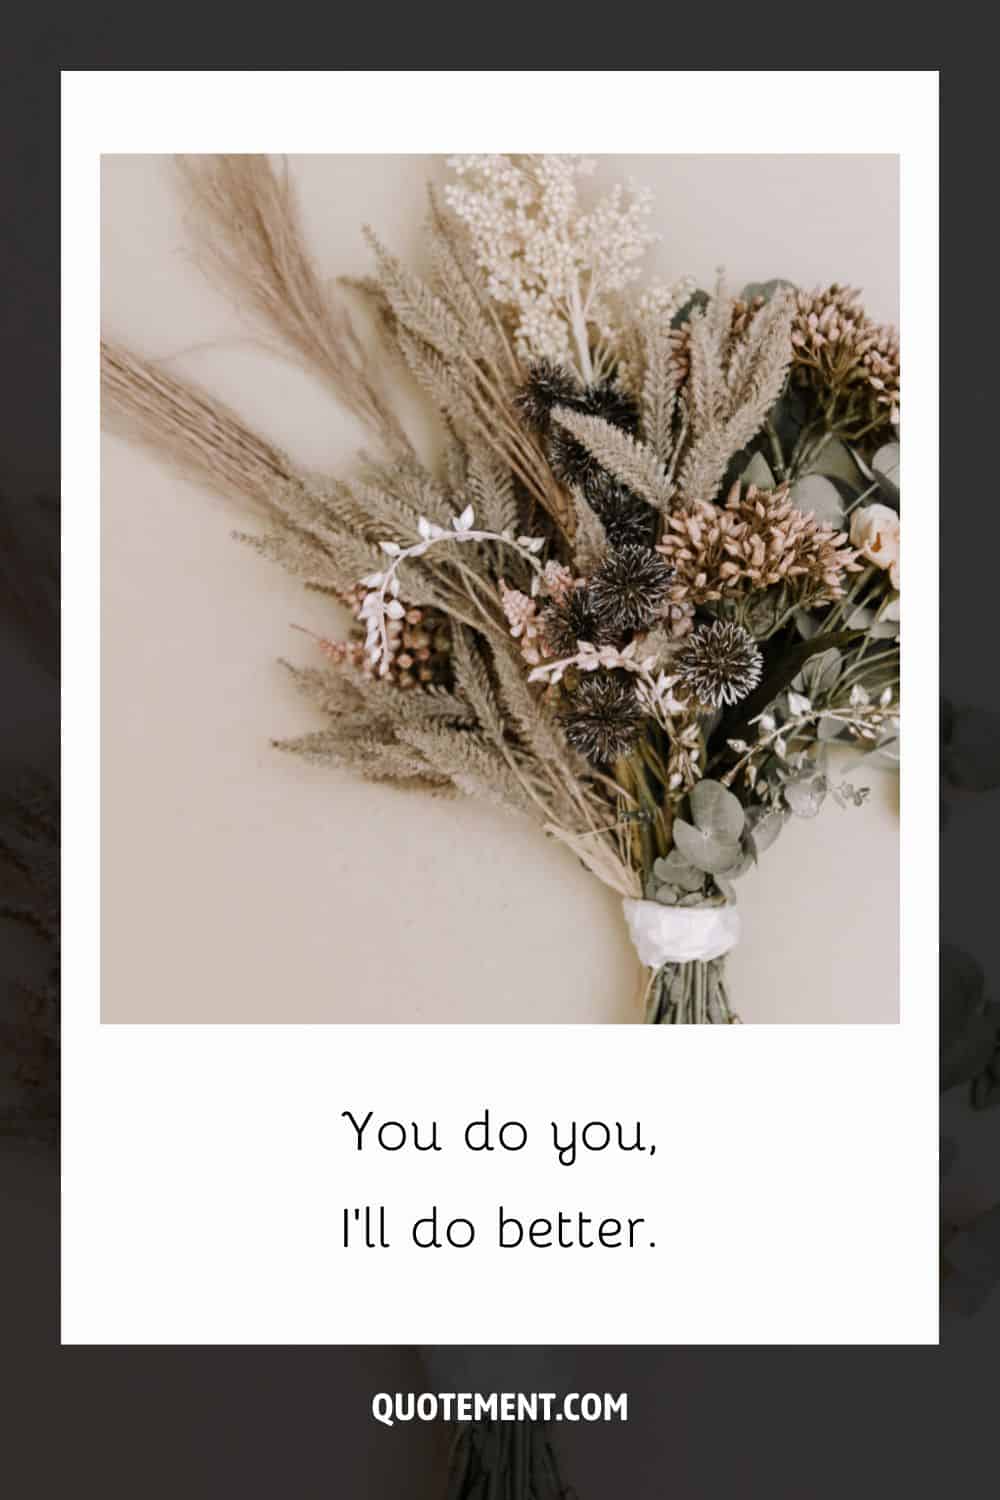 Image of a bouquet of flowers representing dope insta caption.
